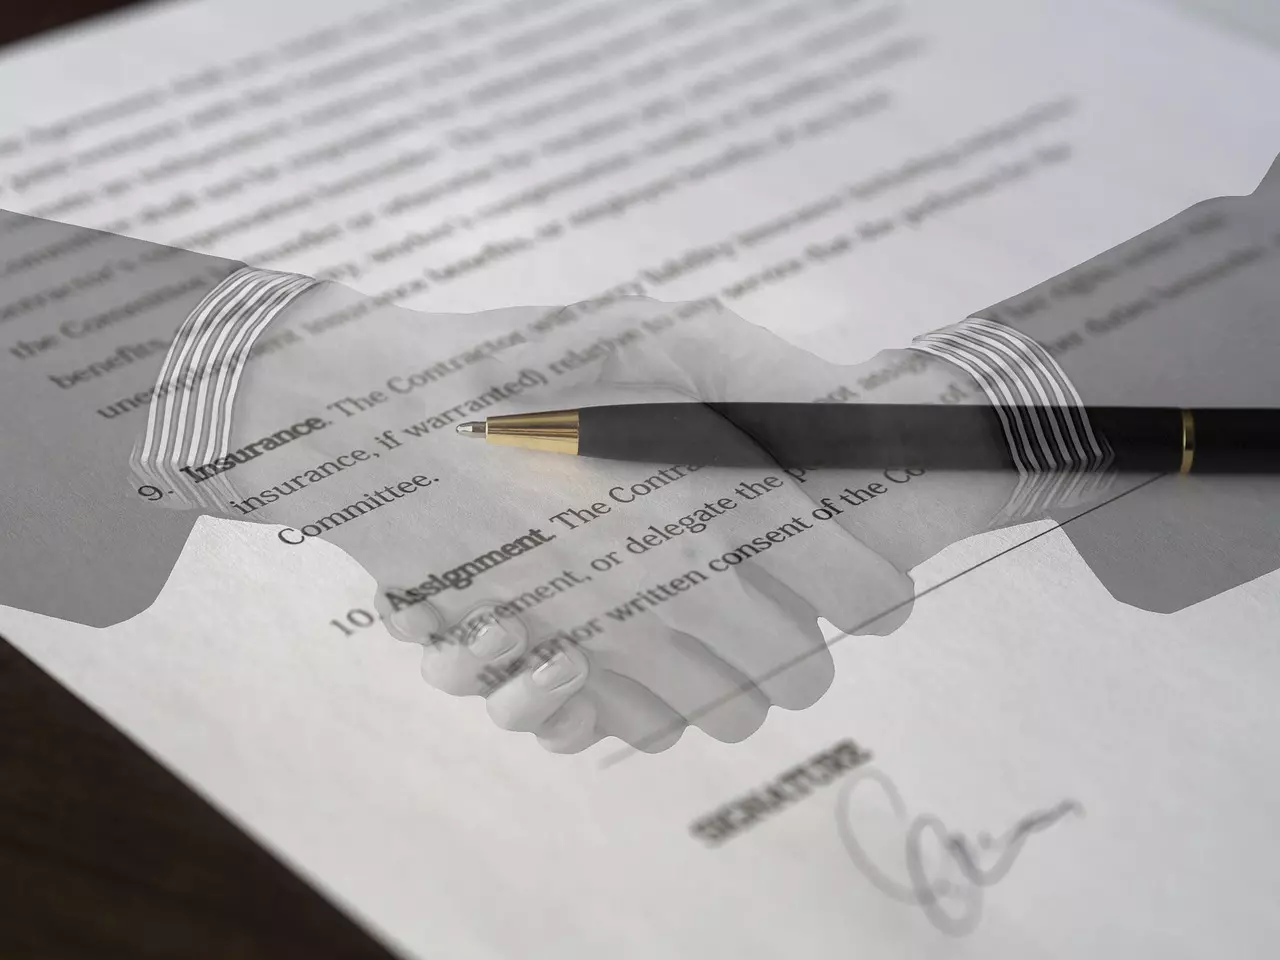 A pen lying on a legal document